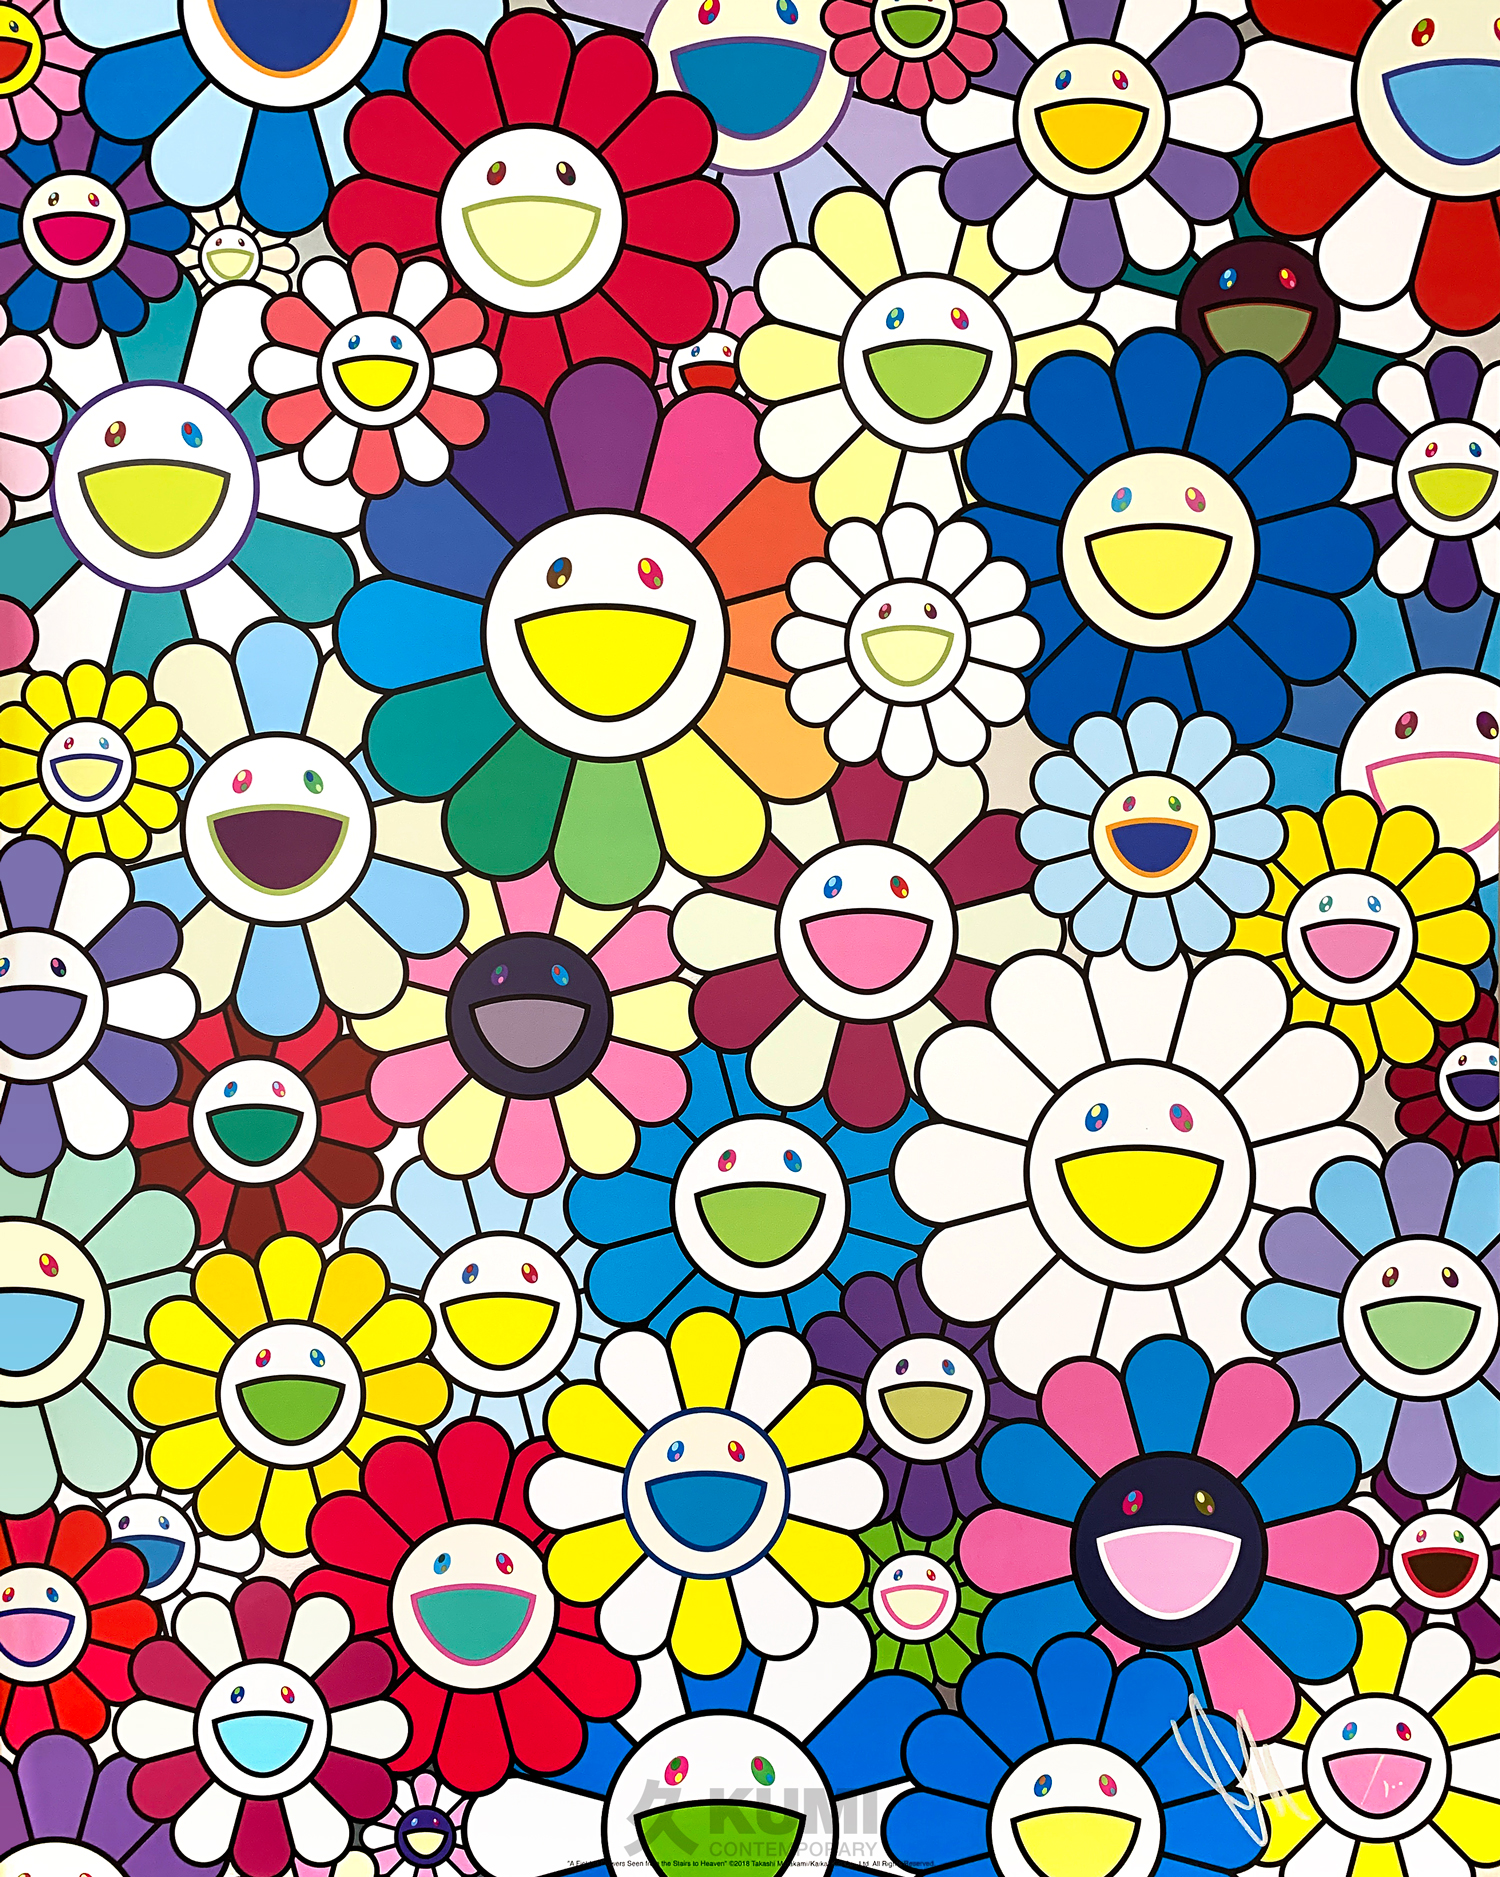 Takashi Murakami A Field of Flowers Seen from the Stairs to Heaven Print | Kumi Contemporary